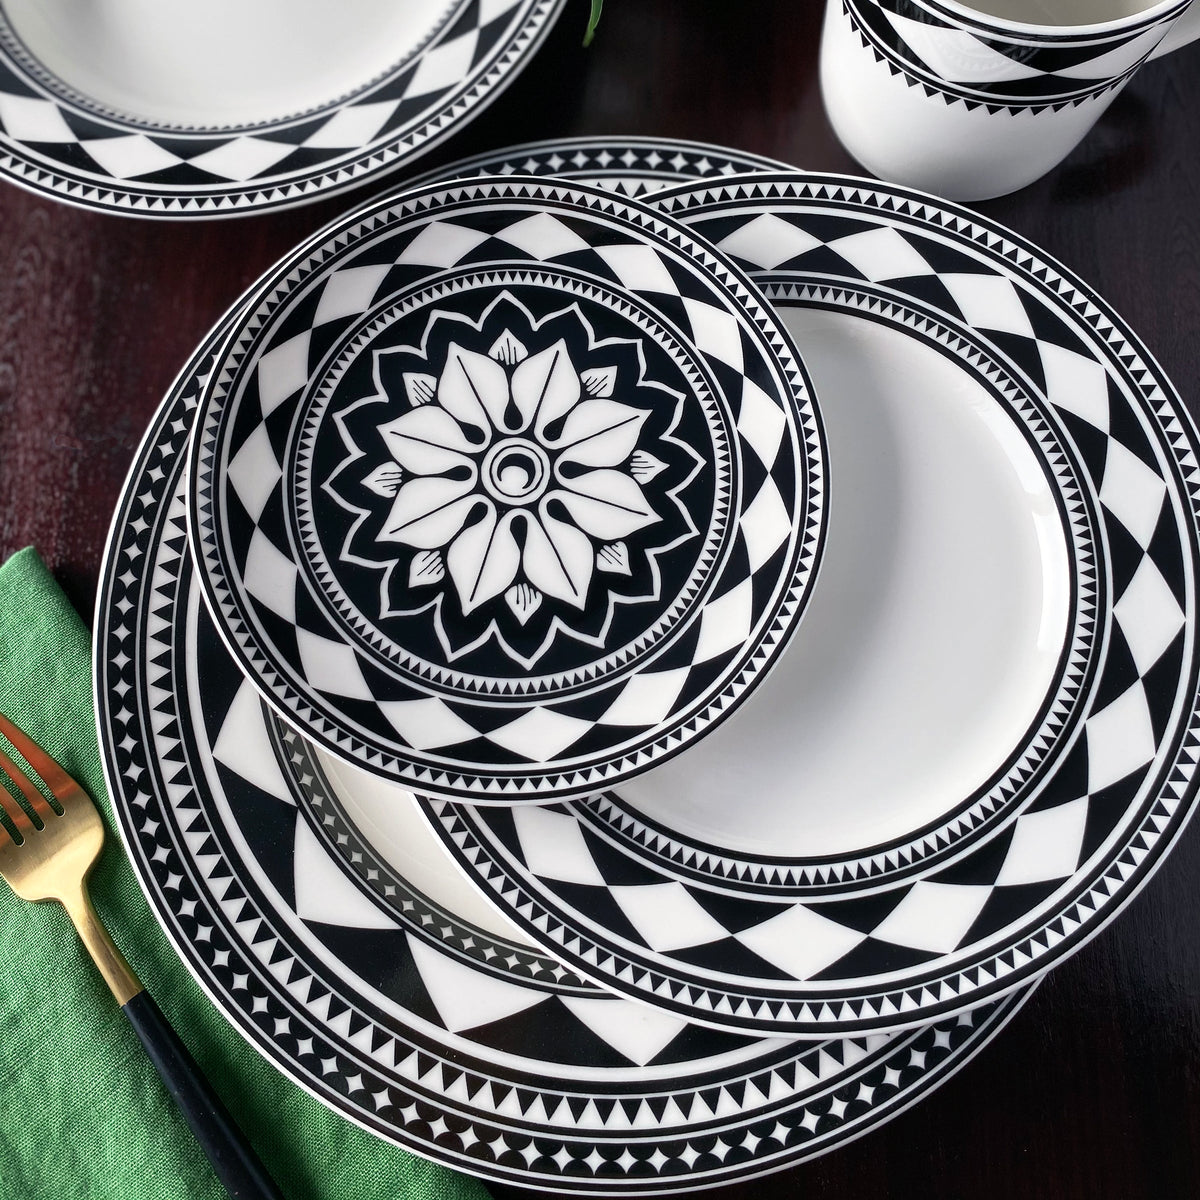 A set of Fez Rimmed Salad Plates from Caskata Artisanal Home is neatly stacked on a dark wooden table. A green napkin and gold-accented fork, adding a sophisticated global feel, are placed next to the plates.